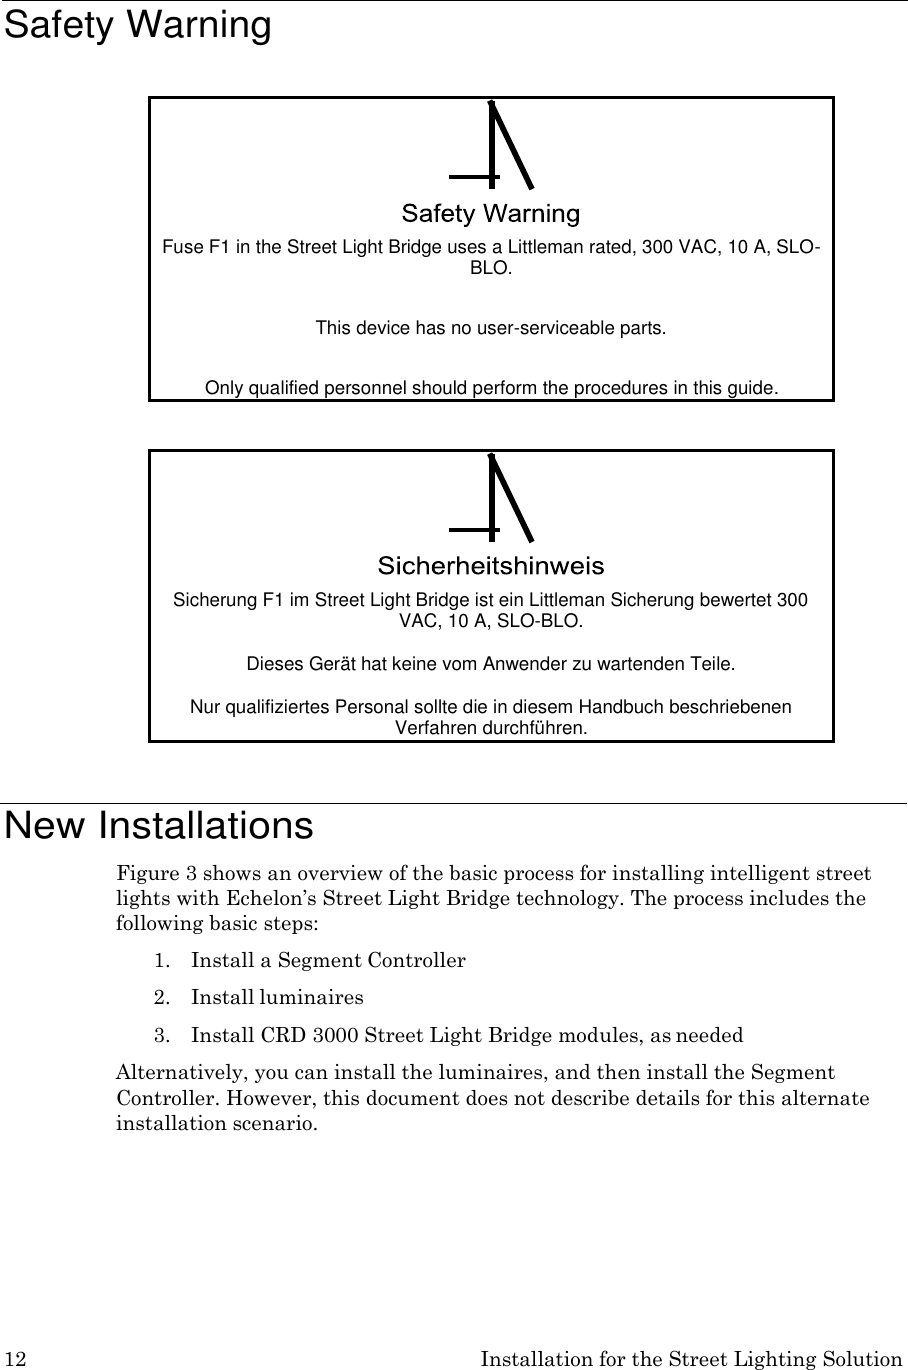 12 Installation for the Street Lighting Solution     Safety Warning       New Installations Figure 3 shows an overview of the basic process for installing intelligent street lights with Echelon’s Street Light Bridge technology. The process includes the following basic steps: 1. Install a Segment Controller 2. Install luminaires 3. Install CRD 3000 Street Light Bridge modules, as needed Alternatively, you can install the luminaires, and then install the Segment Controller. However, this document does not describe details for this alternate installation scenario.  !  Fuse F1 in the Street Light Bridge uses a Littleman rated, 300 VAC, 10 A, SLO- BLO.  This device has no user-serviceable parts.  Only qualified personnel should perform the procedures in this guide.  !  Sicherung F1 im Street Light Bridge ist ein Littleman Sicherung bewertet 300 VAC, 10 A, SLO-BLO.  Dieses Gerät hat keine vom Anwender zu wartenden Teile.  Nur qualifiziertes Personal sollte die in diesem Handbuch beschriebenen Verfahren durchführen. 